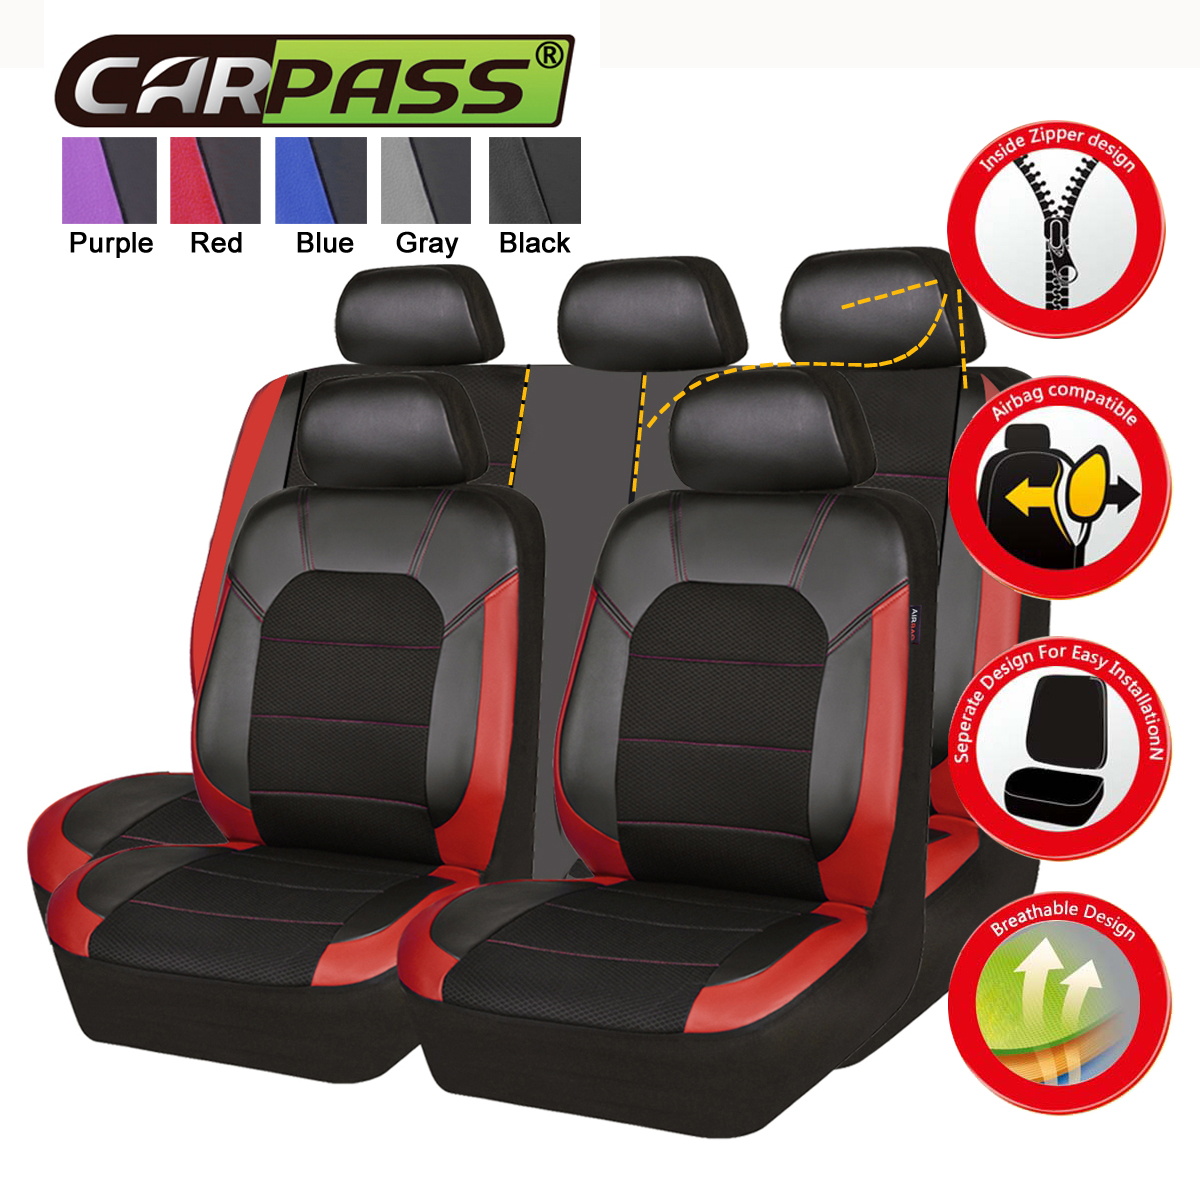 NEW ARRIVAL- Car Pass leather and Mesh Universal Fit Car Seat Covers